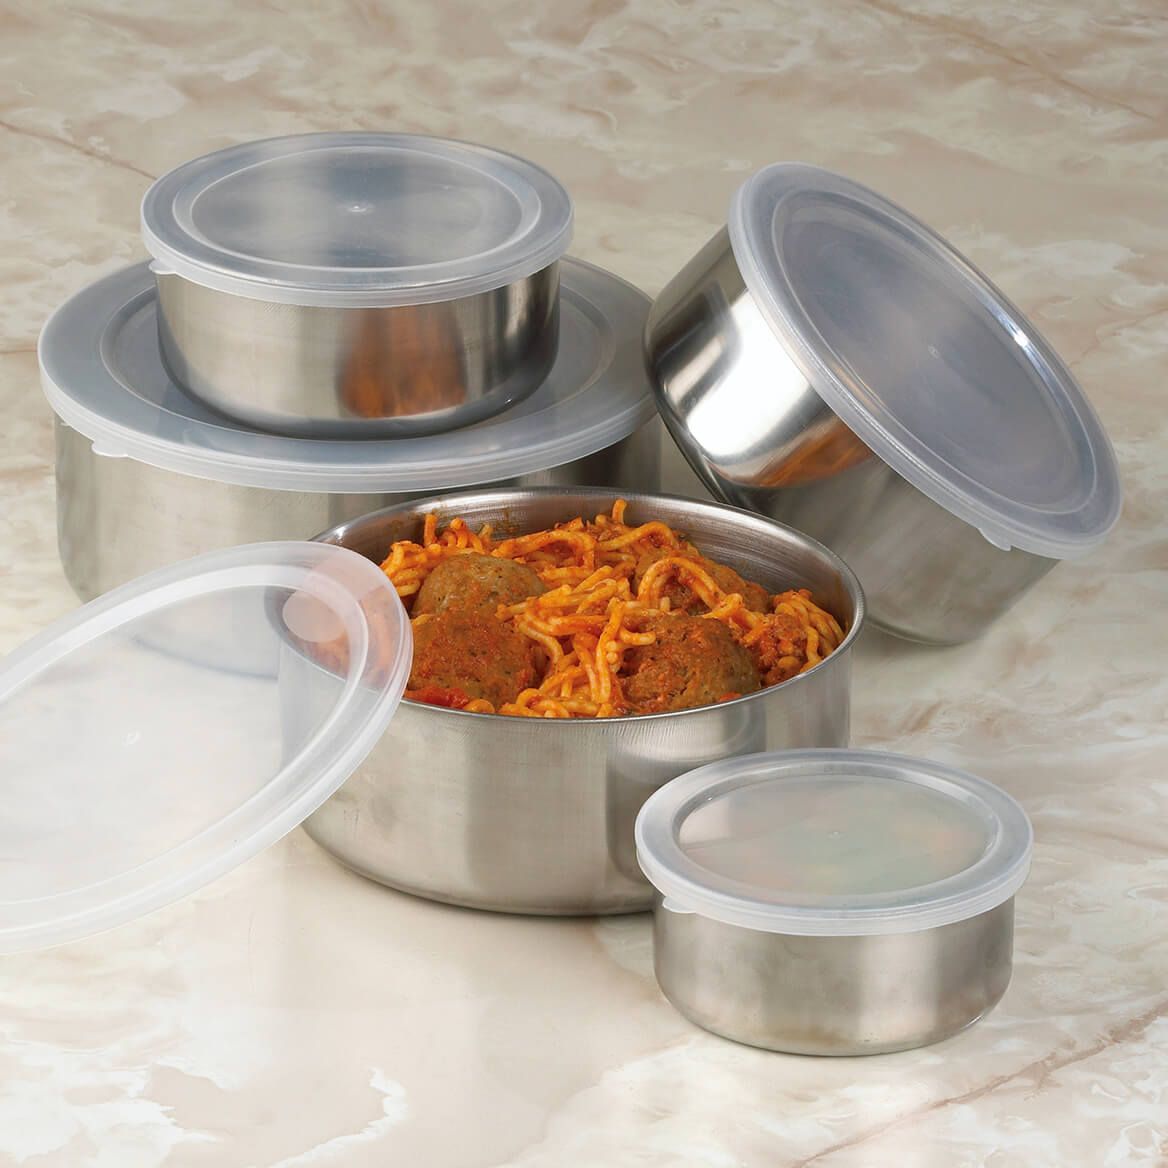 Stainless Steel Storage Bowls with Lids, Set of 5 + '-' + 372015